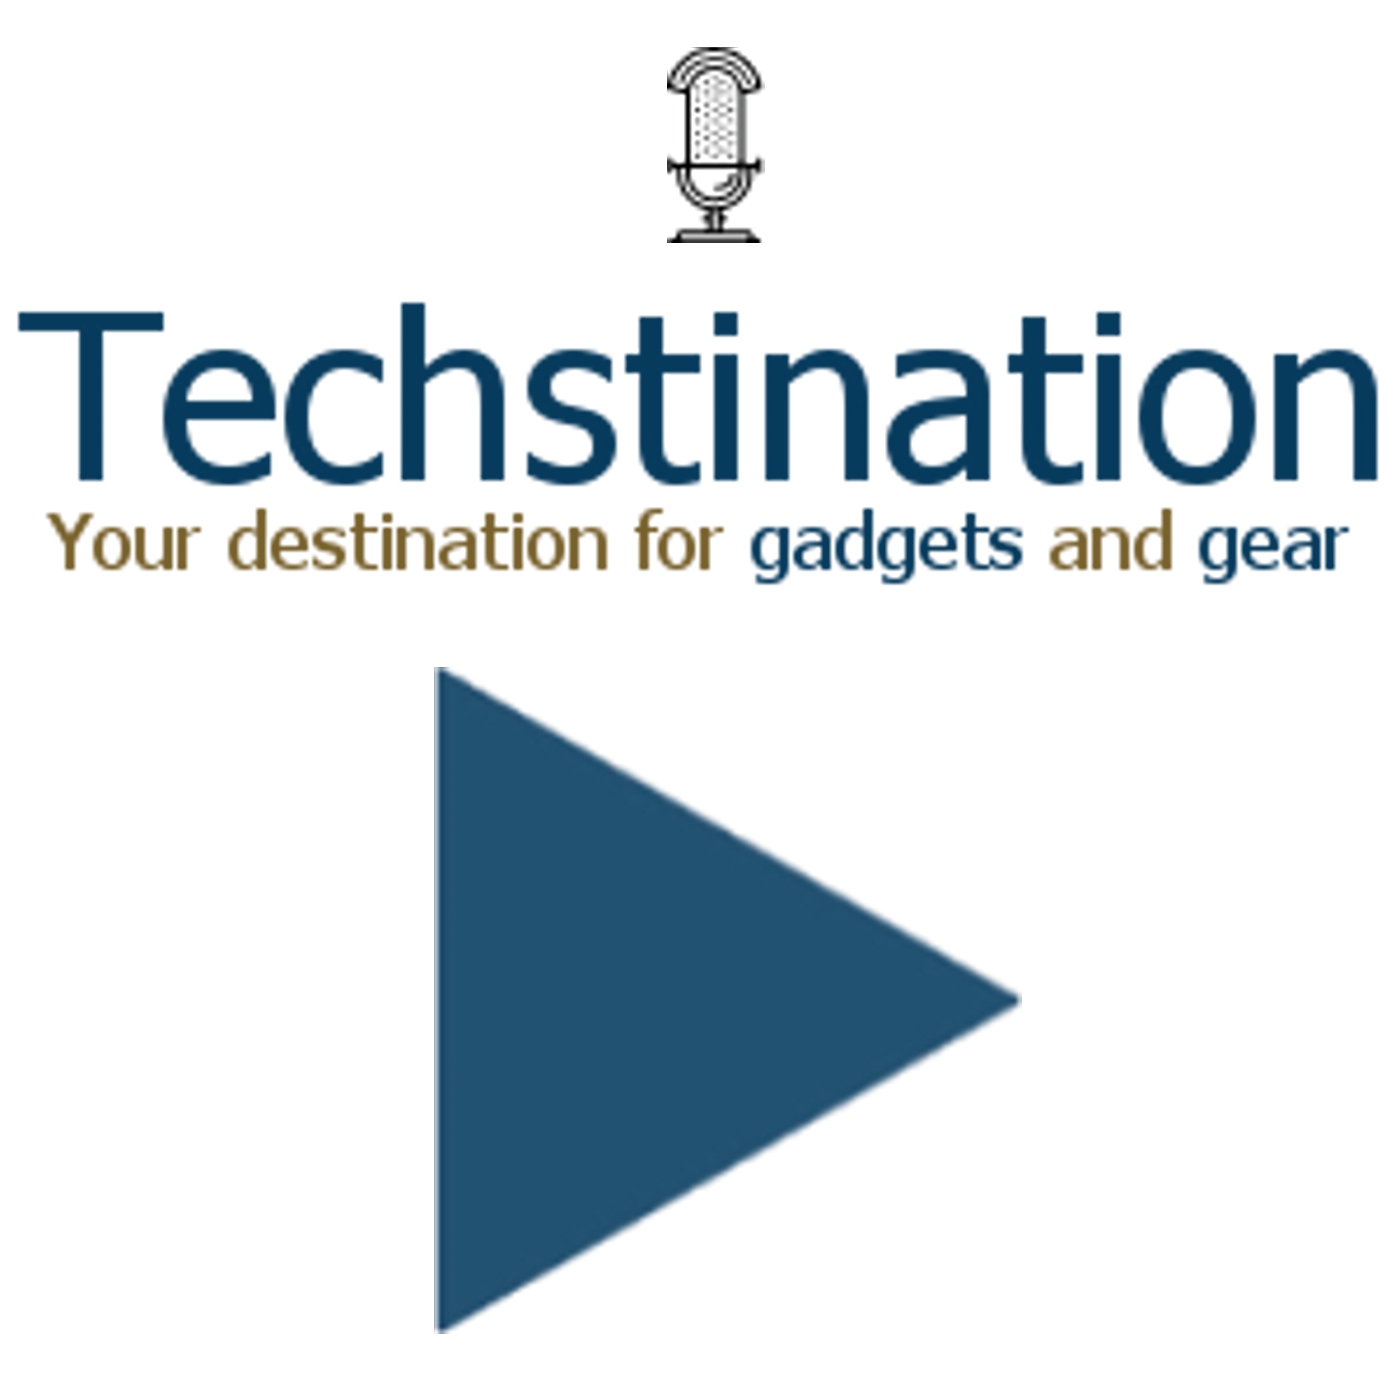 Techstination: Your Destination for Gadgets and Gear